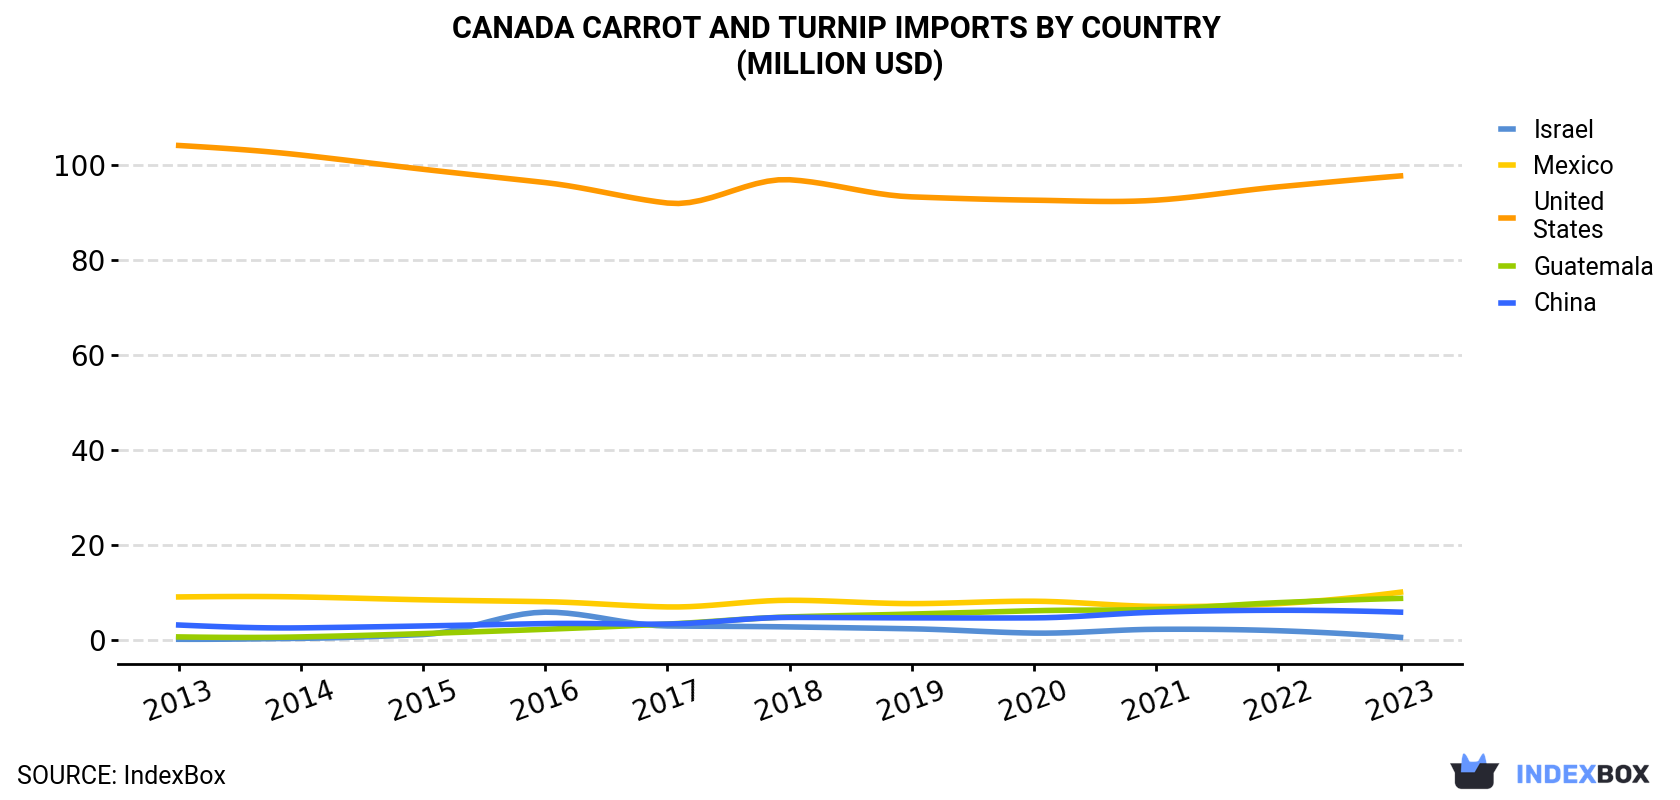 Canada Carrot And Turnip Imports By Country (Million USD)